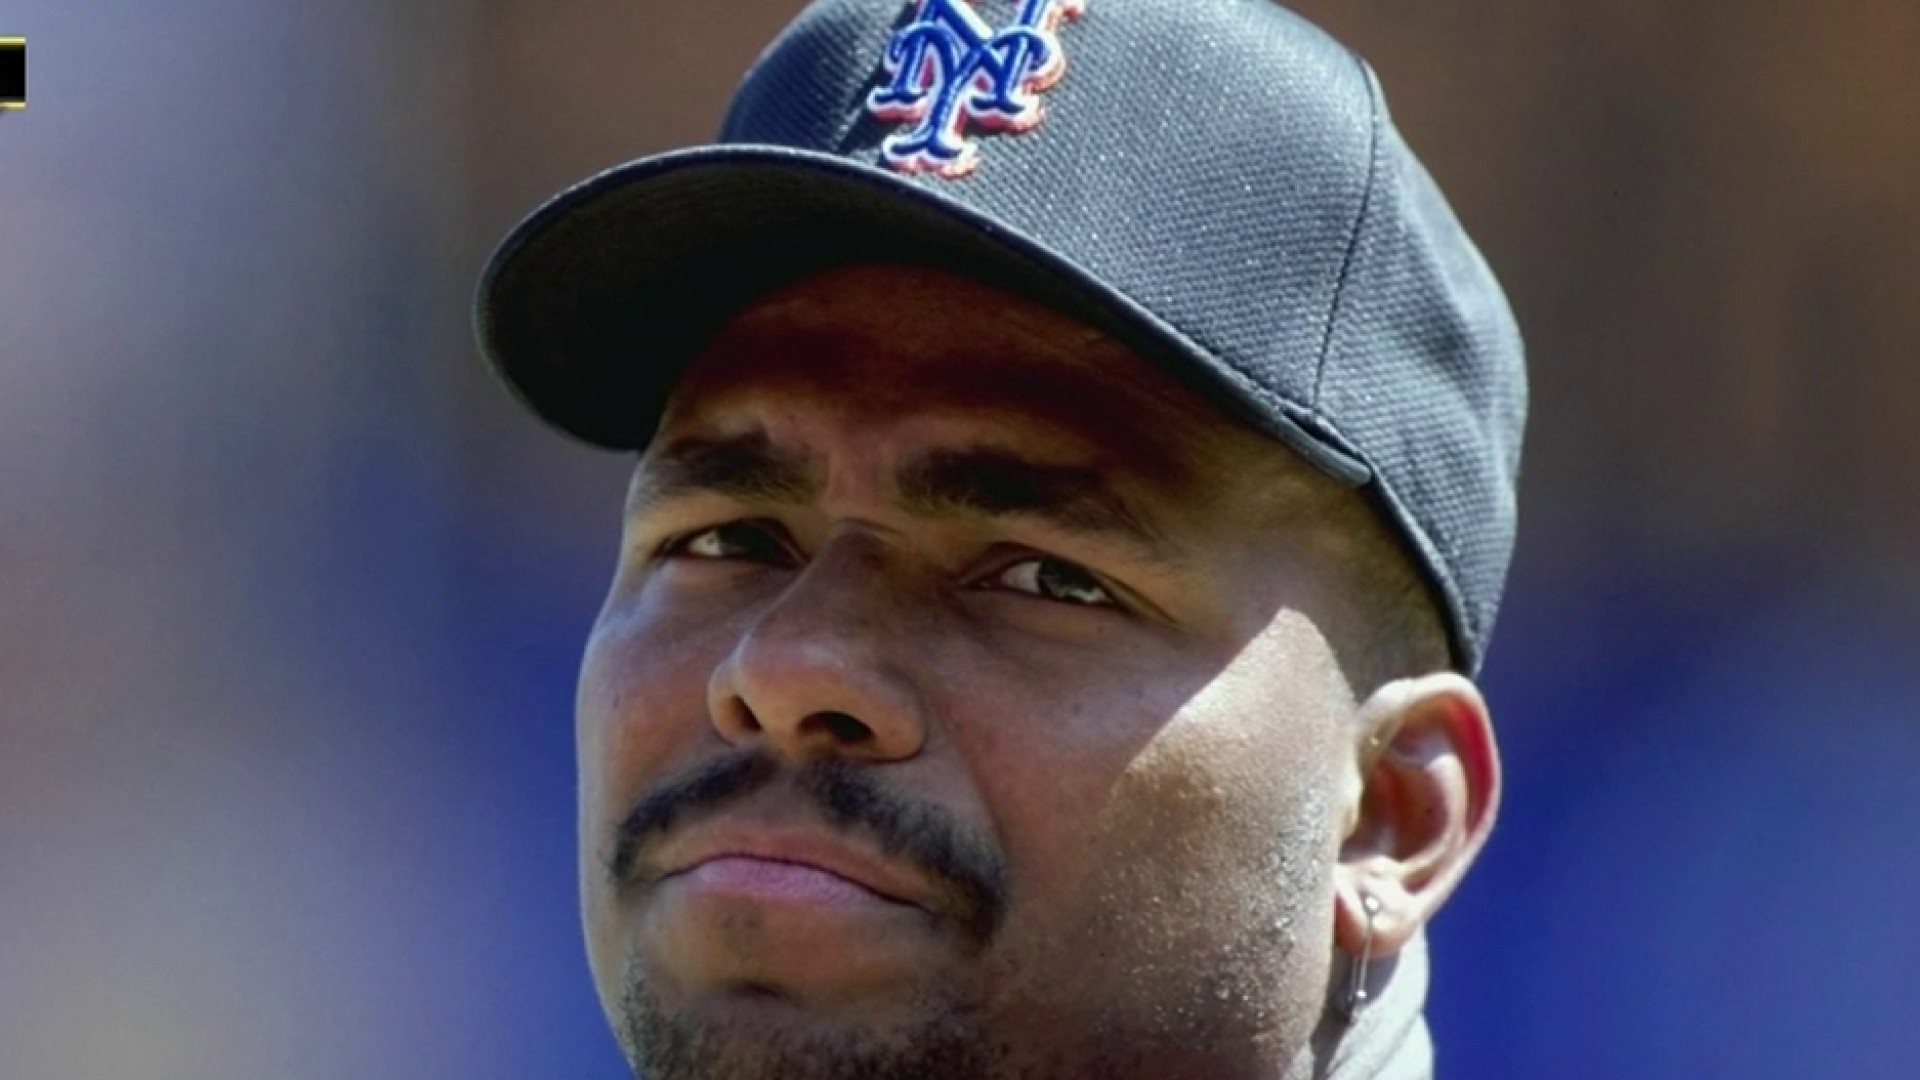 What is Bobby Bonilla Day? Explaining the New York Mets' ongoing payout  saga